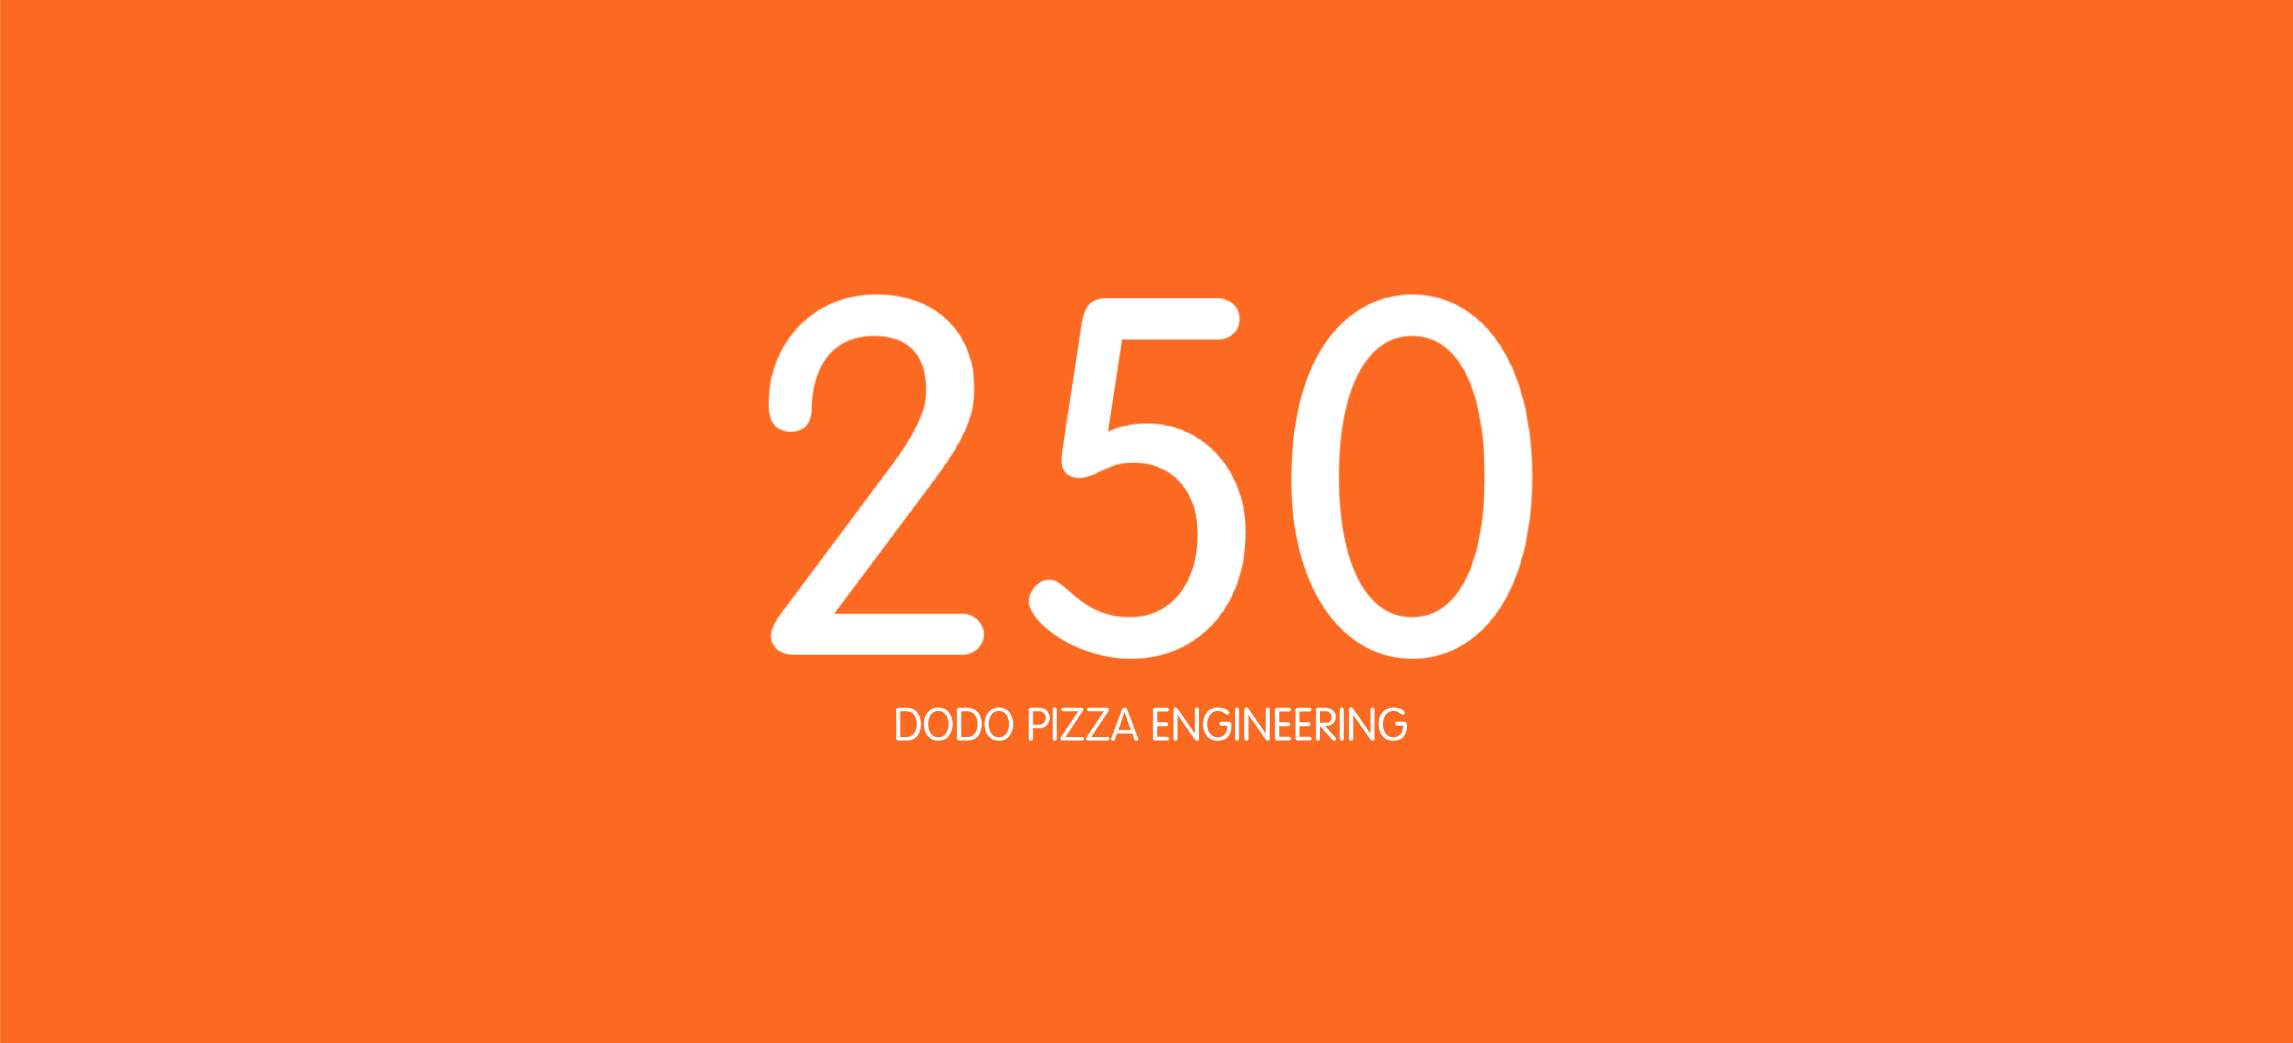 Why Does Dodo Pizza Need 250 Developers?